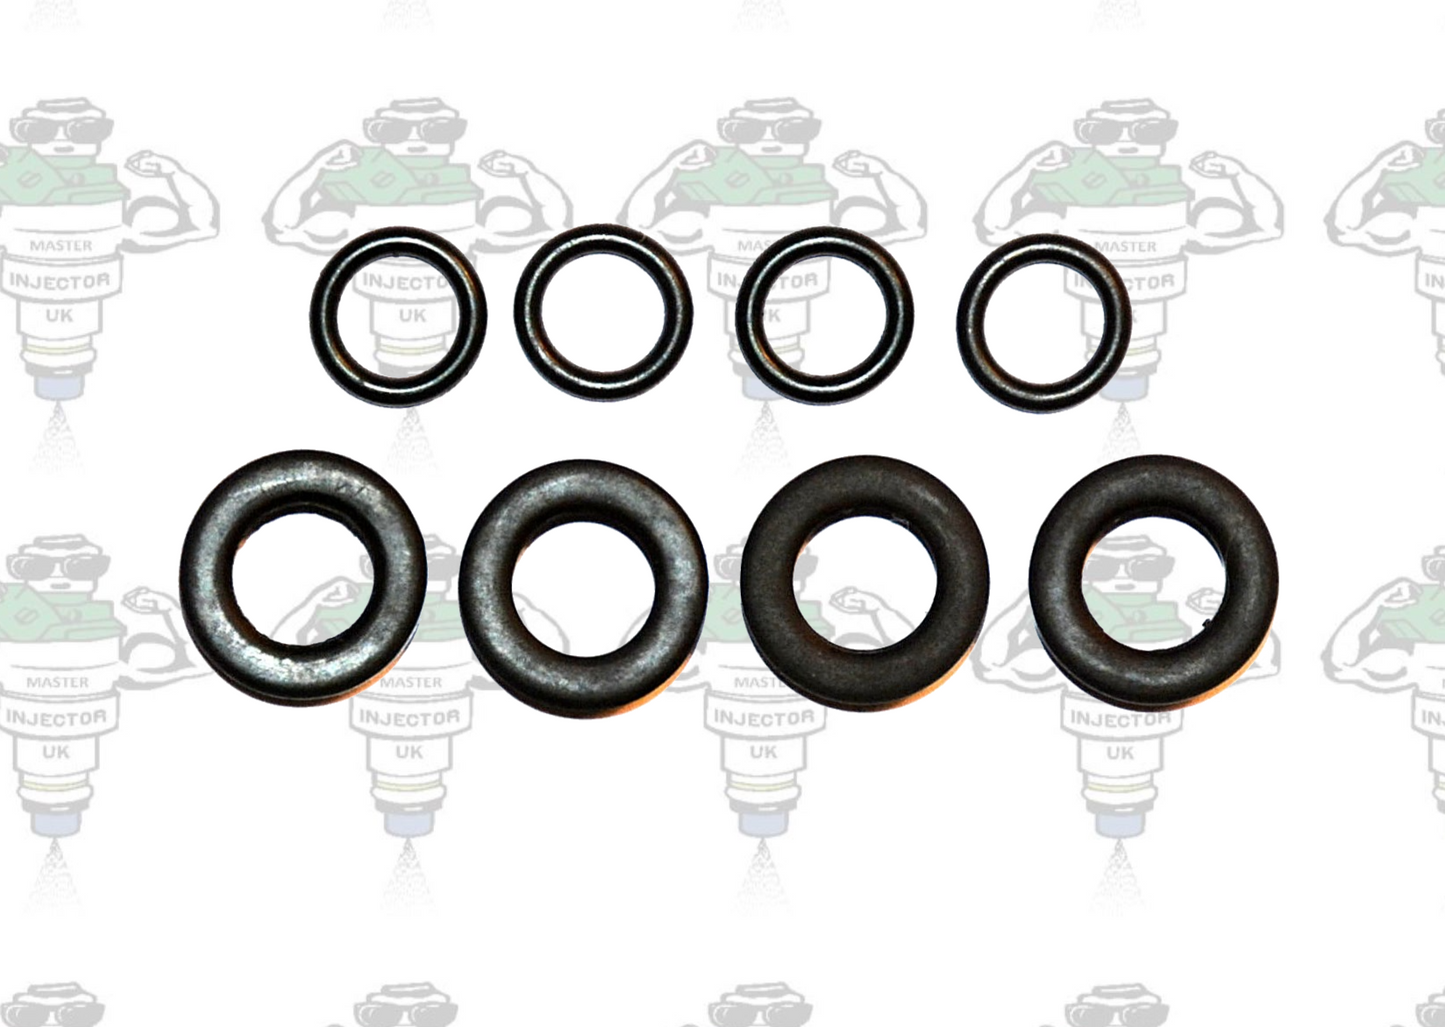 Hyundai Compatible 4 Cylinder Top Fuel Injector Seal Kit Seal Size 13mm - Kit 63